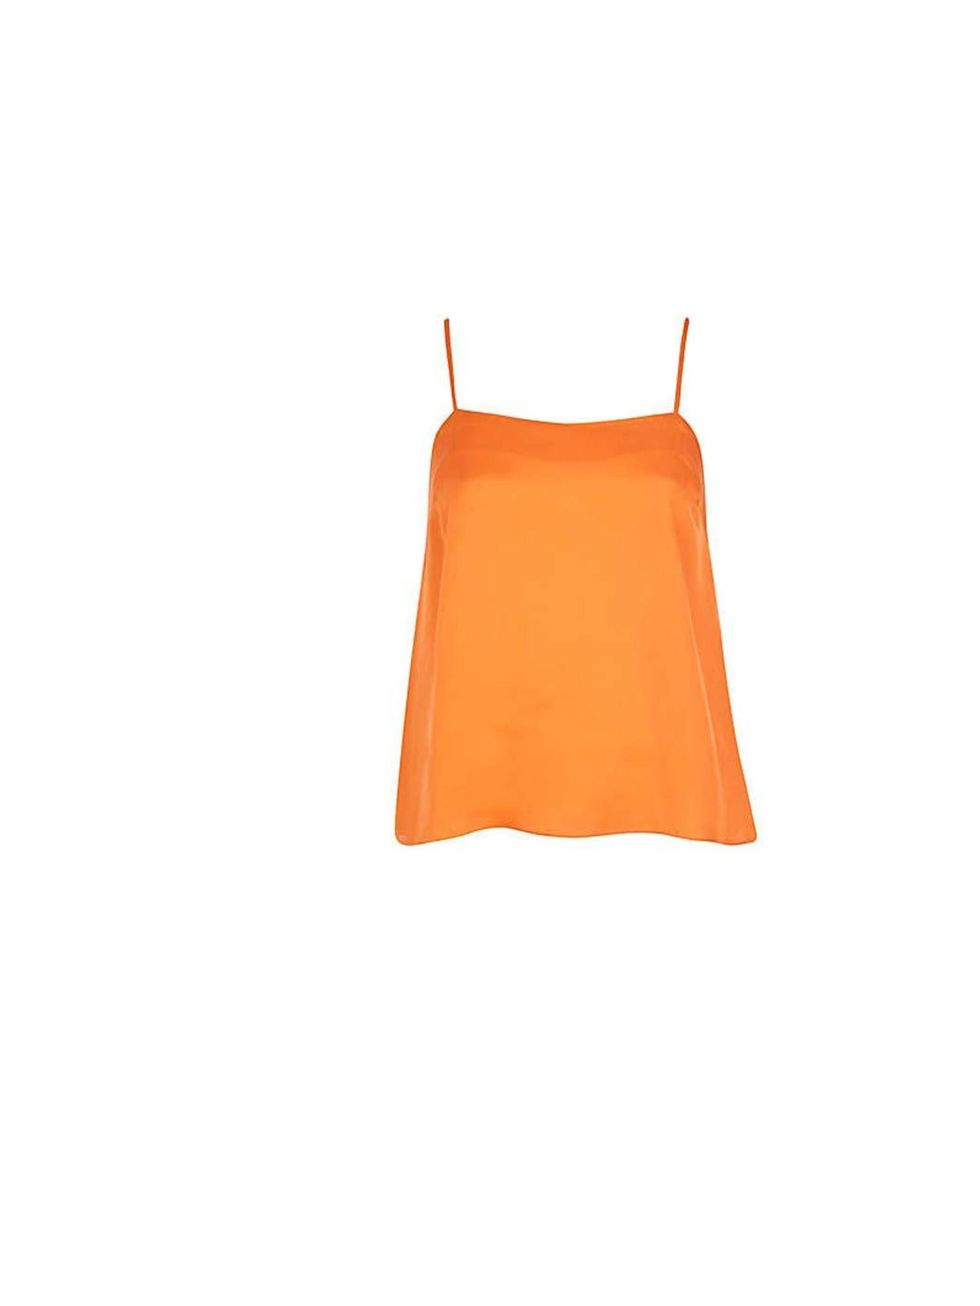 <p>Senior Beauty Editor Amy Lawrenson will be channelling Sienna Miller's laid back summer style and teaming this orange vest with leather shorts, ankle boots, her new H&M bowler hat and a long pendant necklace.</p><p><a href="River%20Island%20vest">River